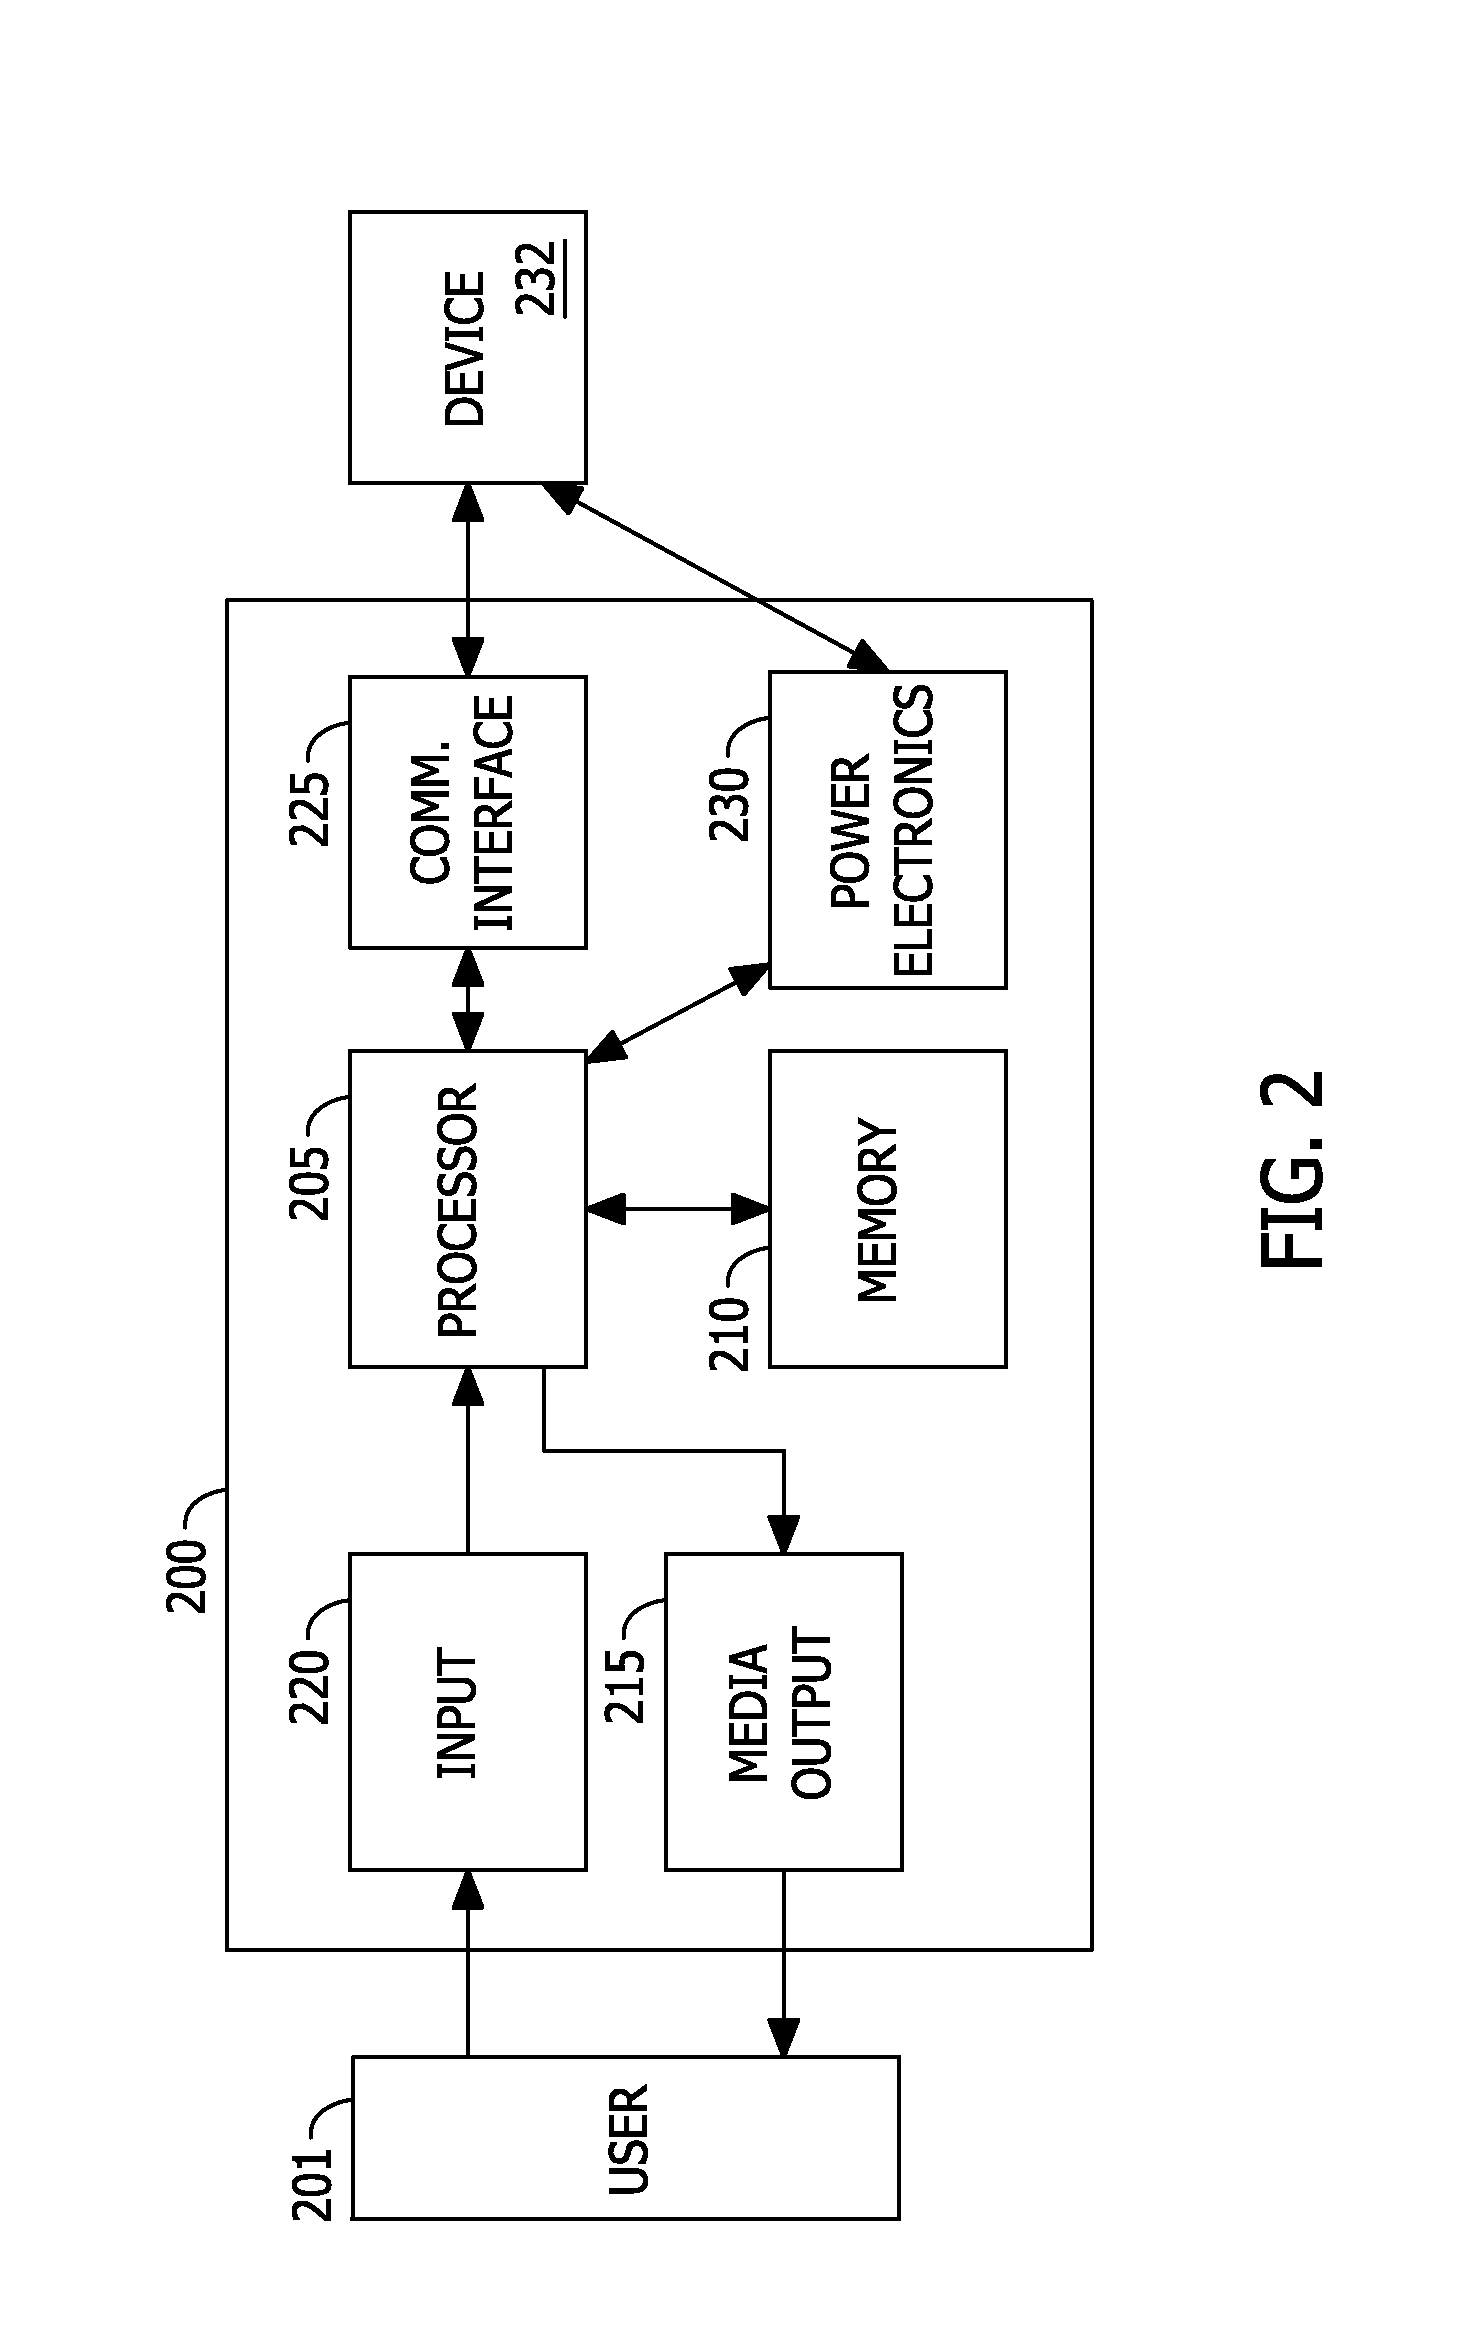 System and method for controlling a motor